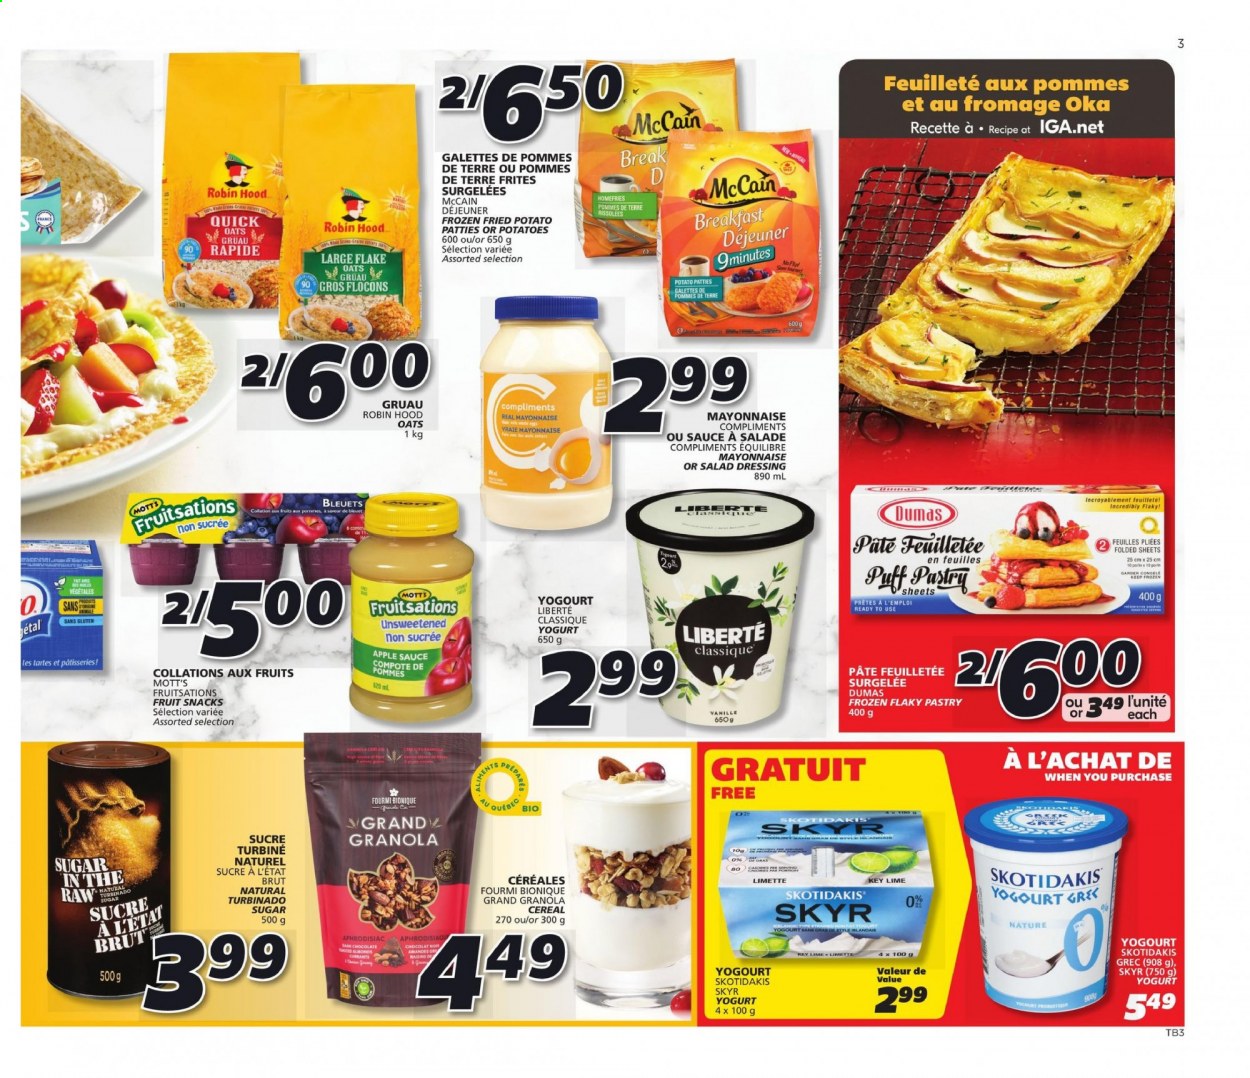 thumbnail - IGA Flyer - January 21, 2021 - January 27, 2021 - Sales products - potatoes, Mott's, sauce, yoghurt, mayonnaise, McCain, chocolate, fruit snack, oats, compote, cereals, Quick Oats, salad dressing, dressing, apple sauce, almonds, currants, granola. Page 3.